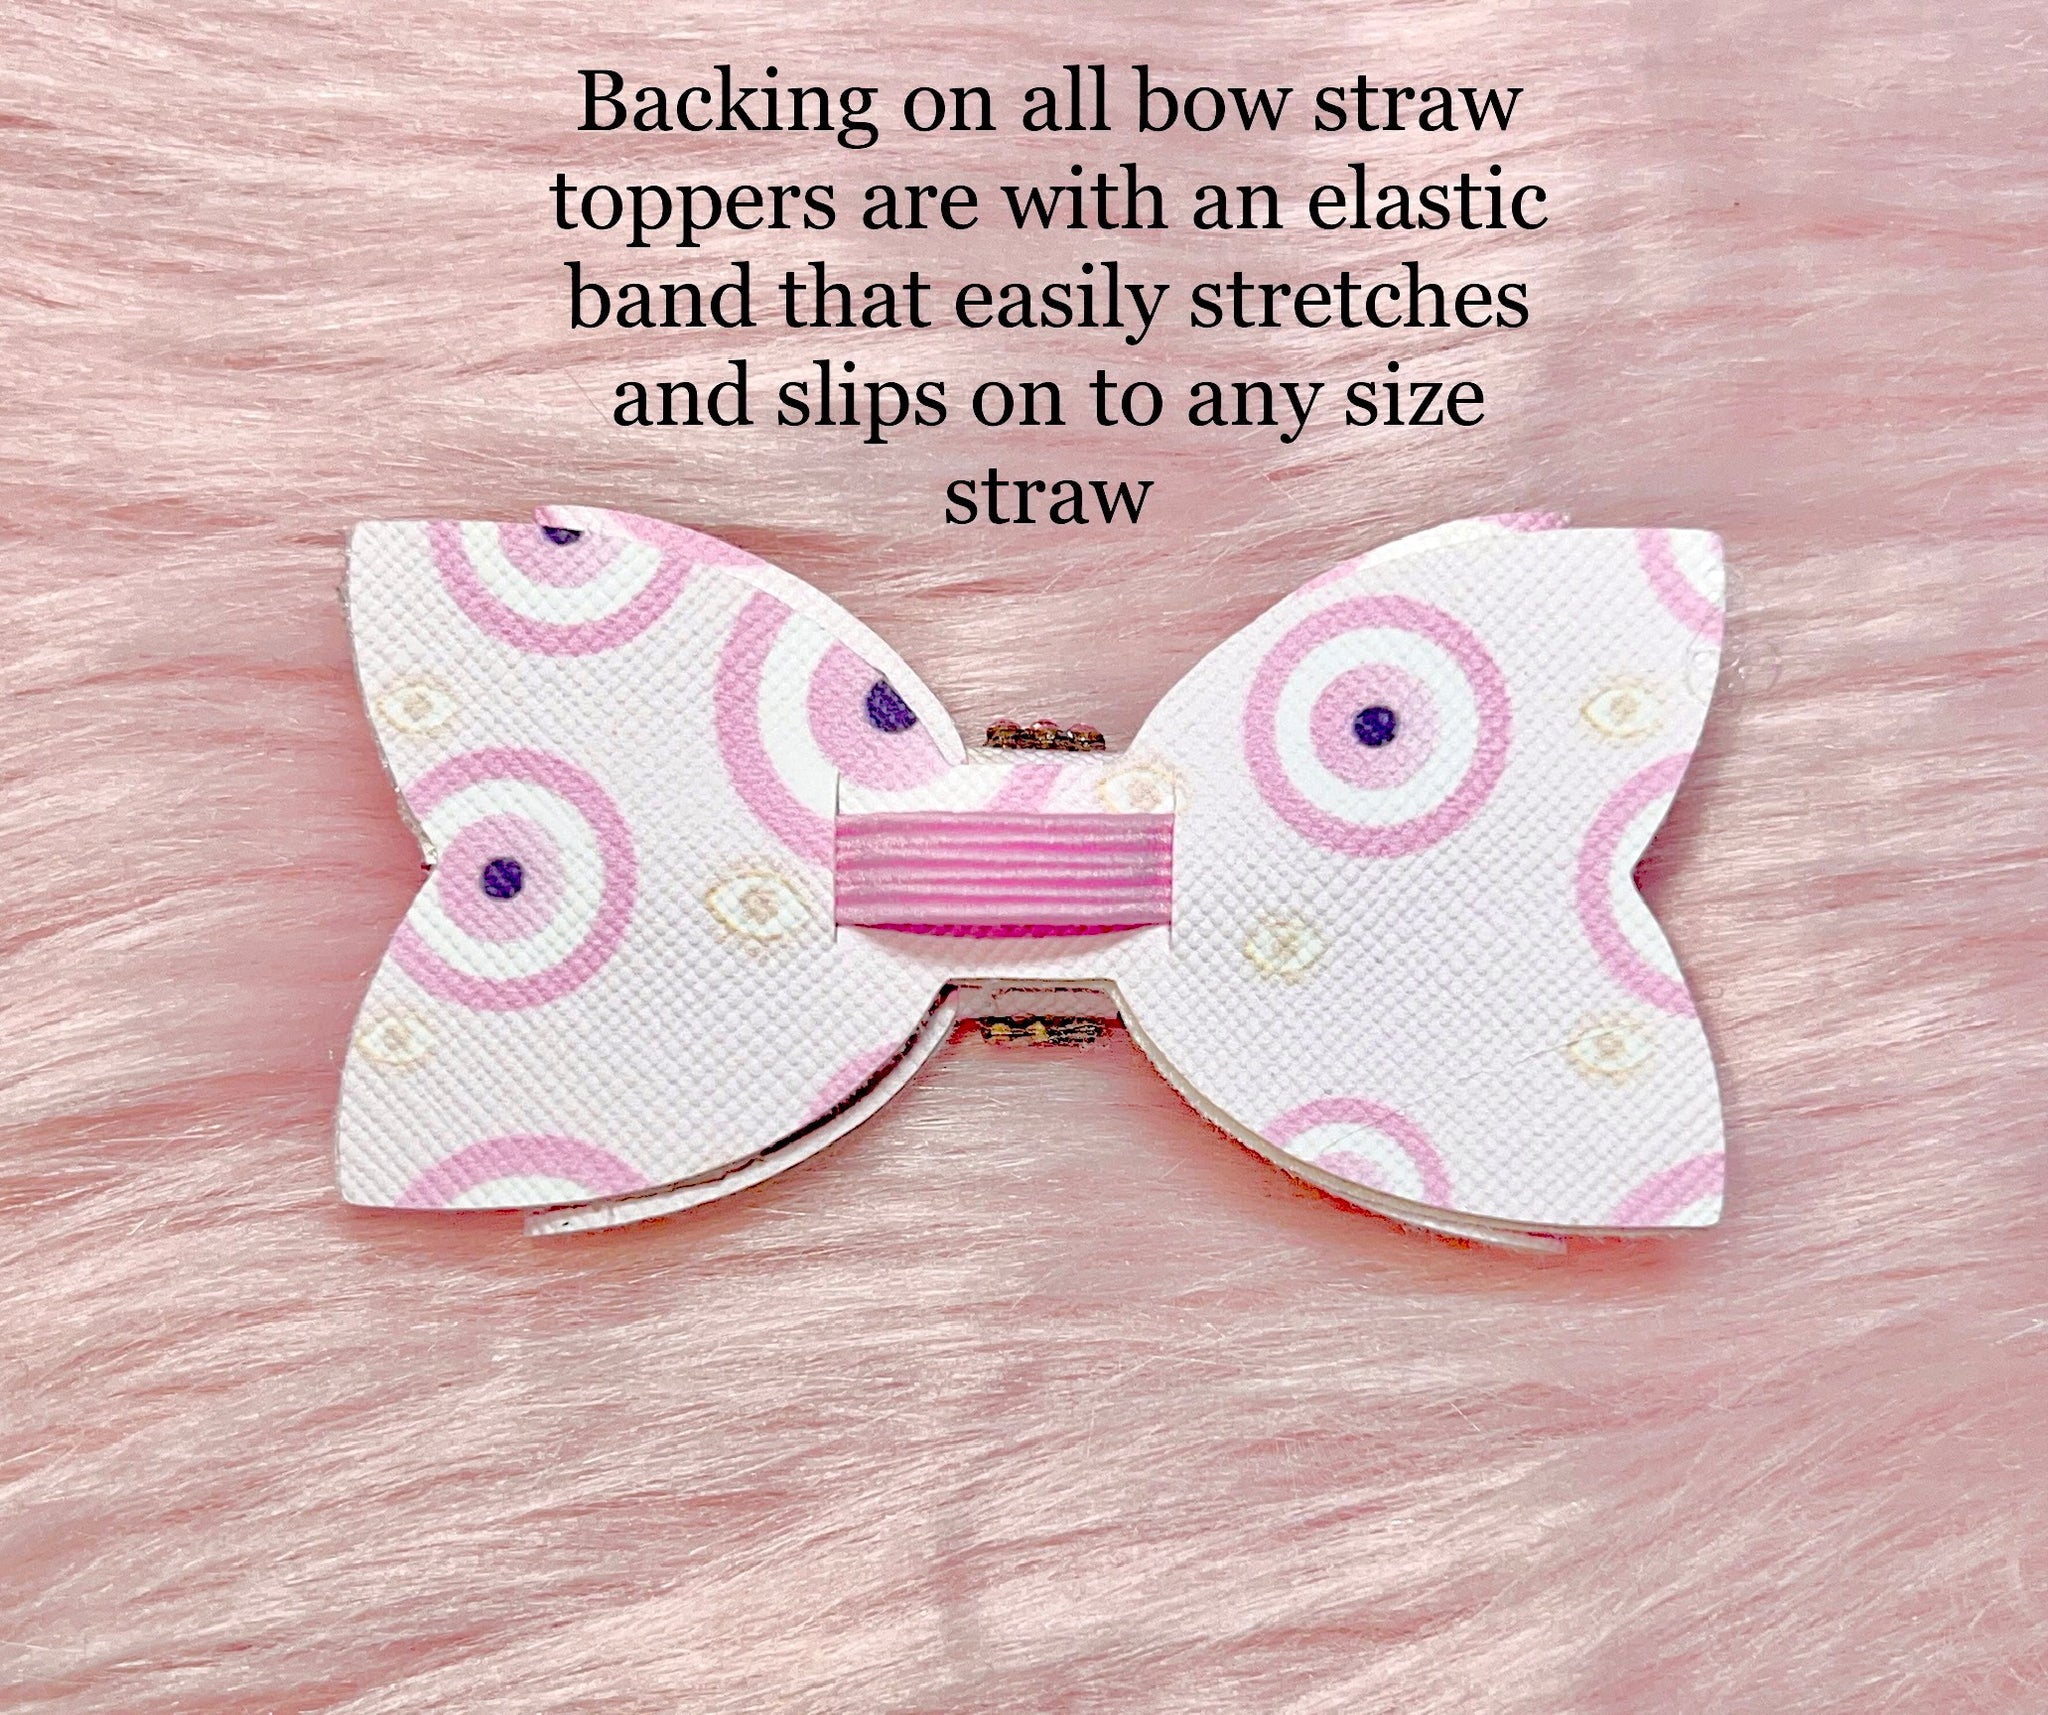 Rosarivae 4pcs Bowknot Straw Toppers Decorative Straw Toppers